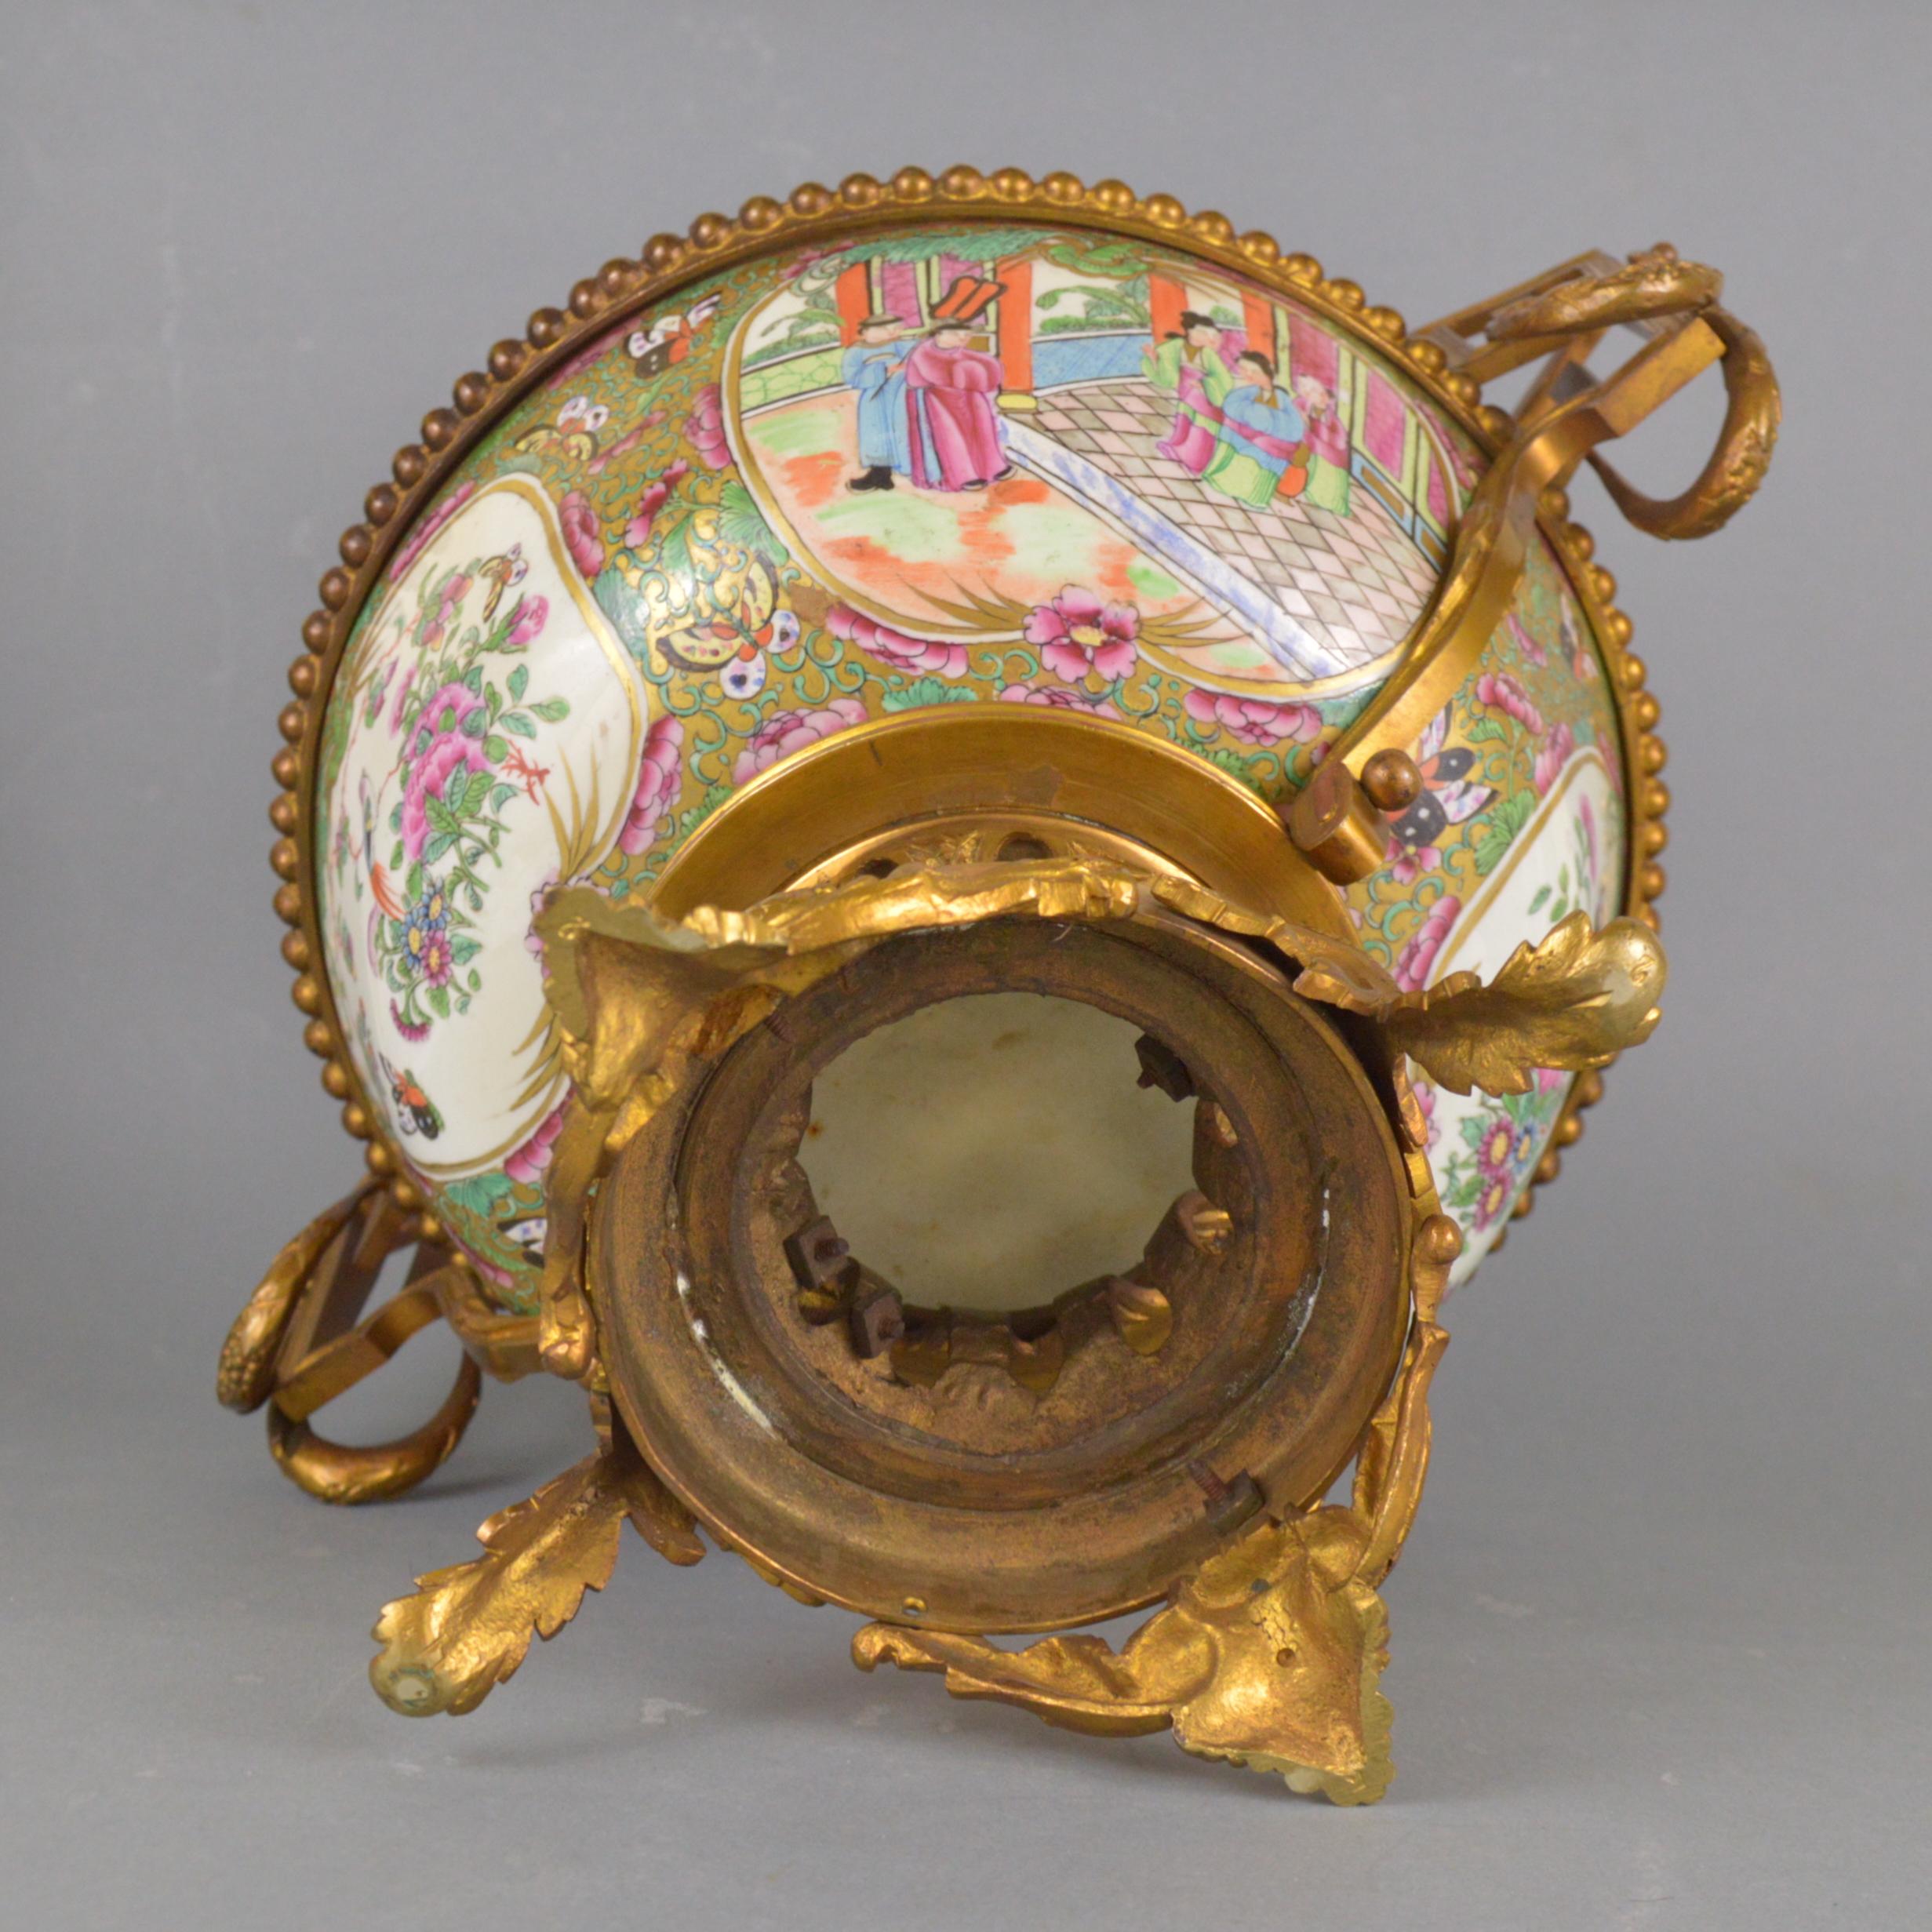 19th Century Chinese Gilt Bronze-Mounted Canton Porcelain Bowl 2